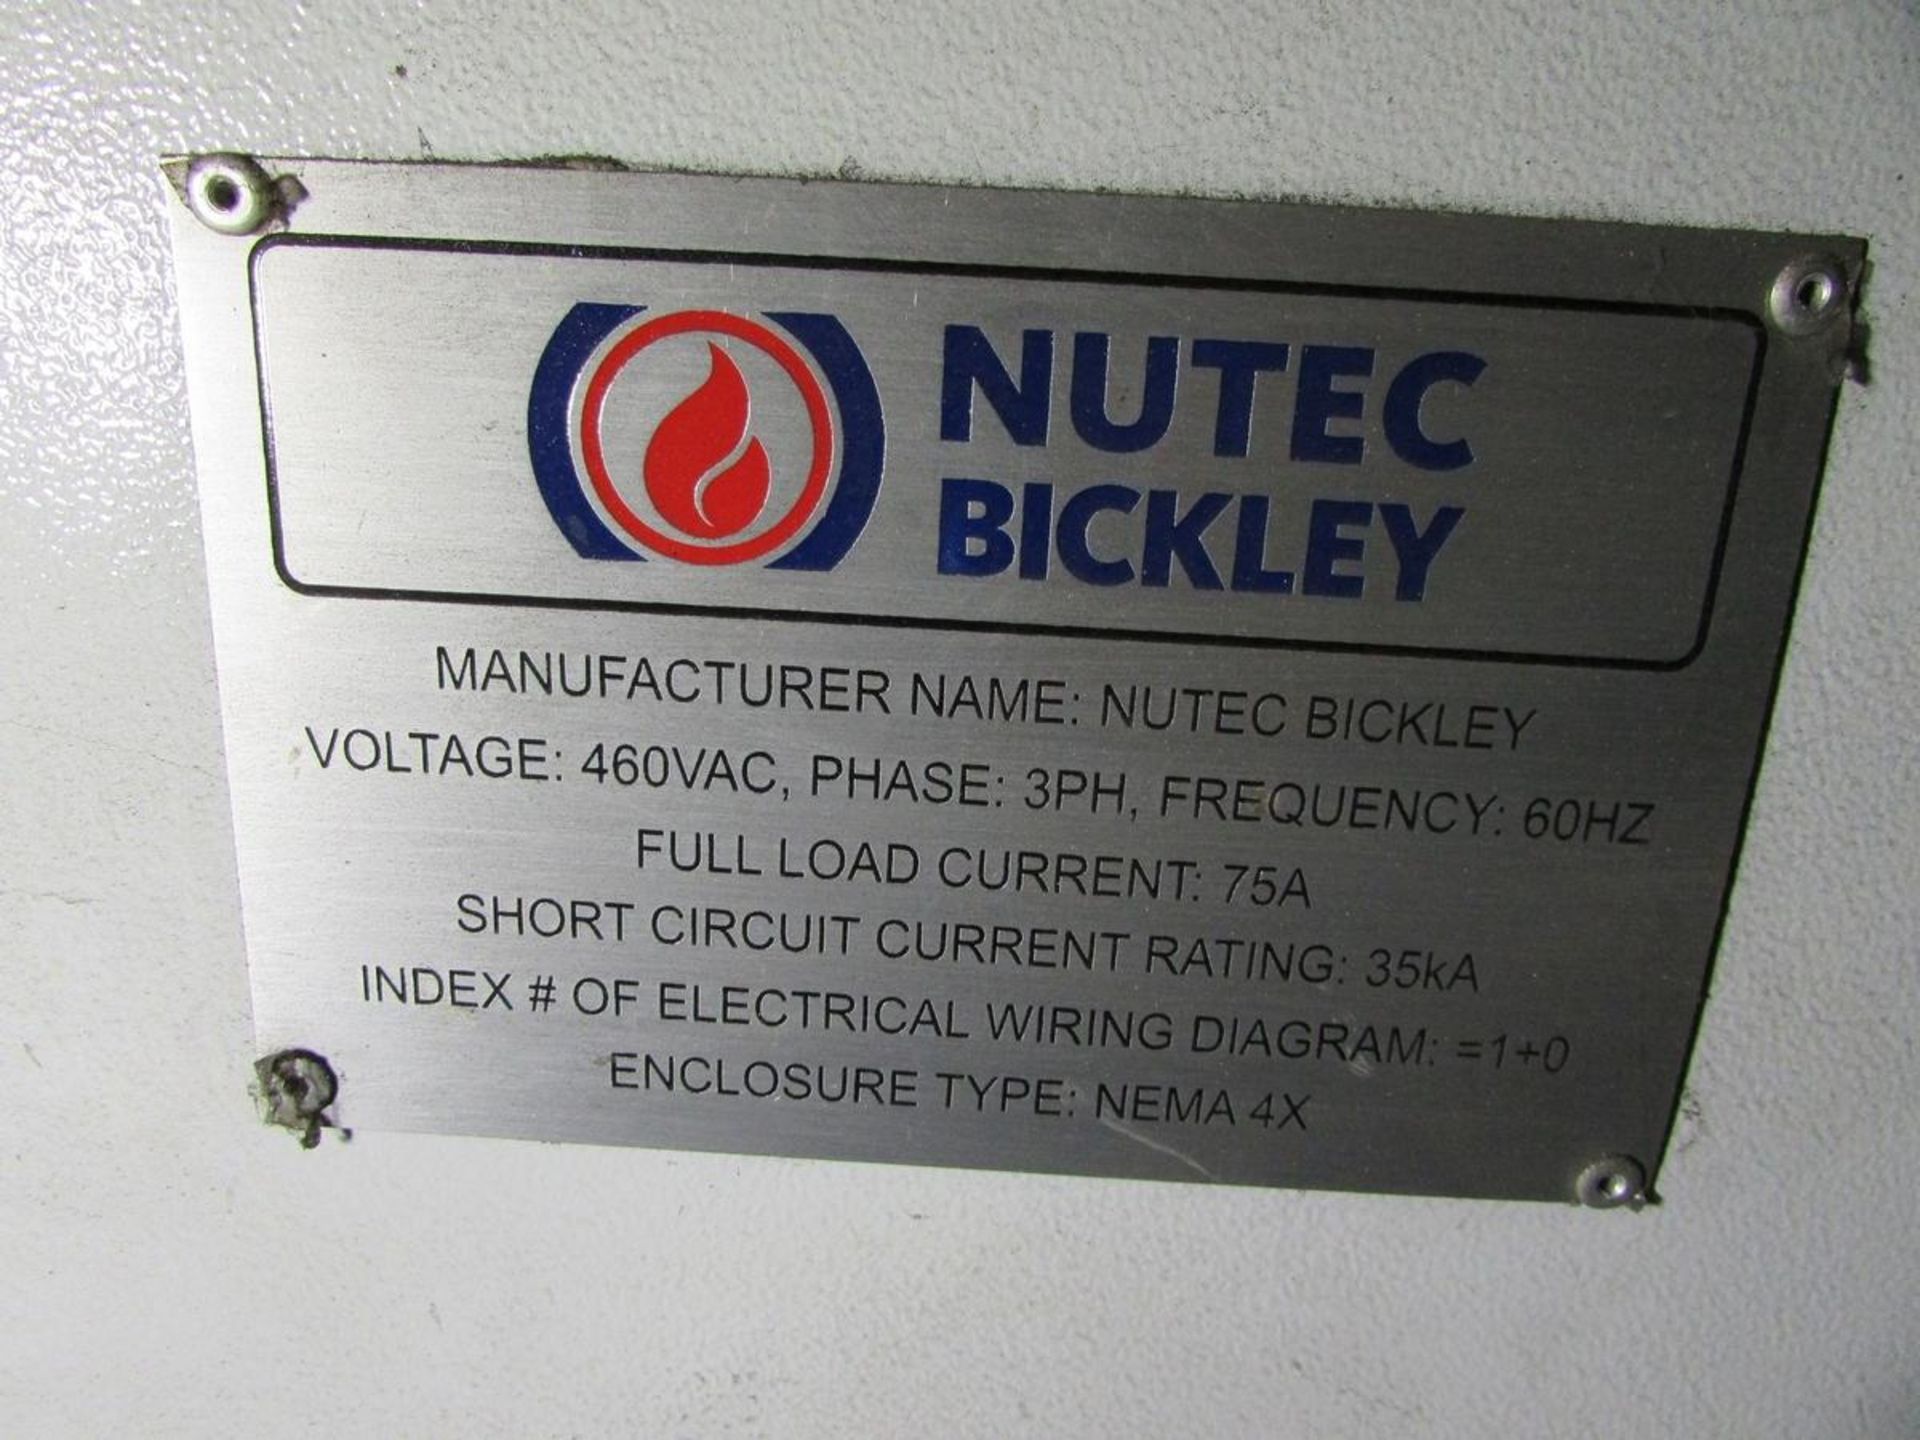 Nutec Bickley 11'x15'x7' Car Bottom NG Heat Treat Oven - Image 11 of 11